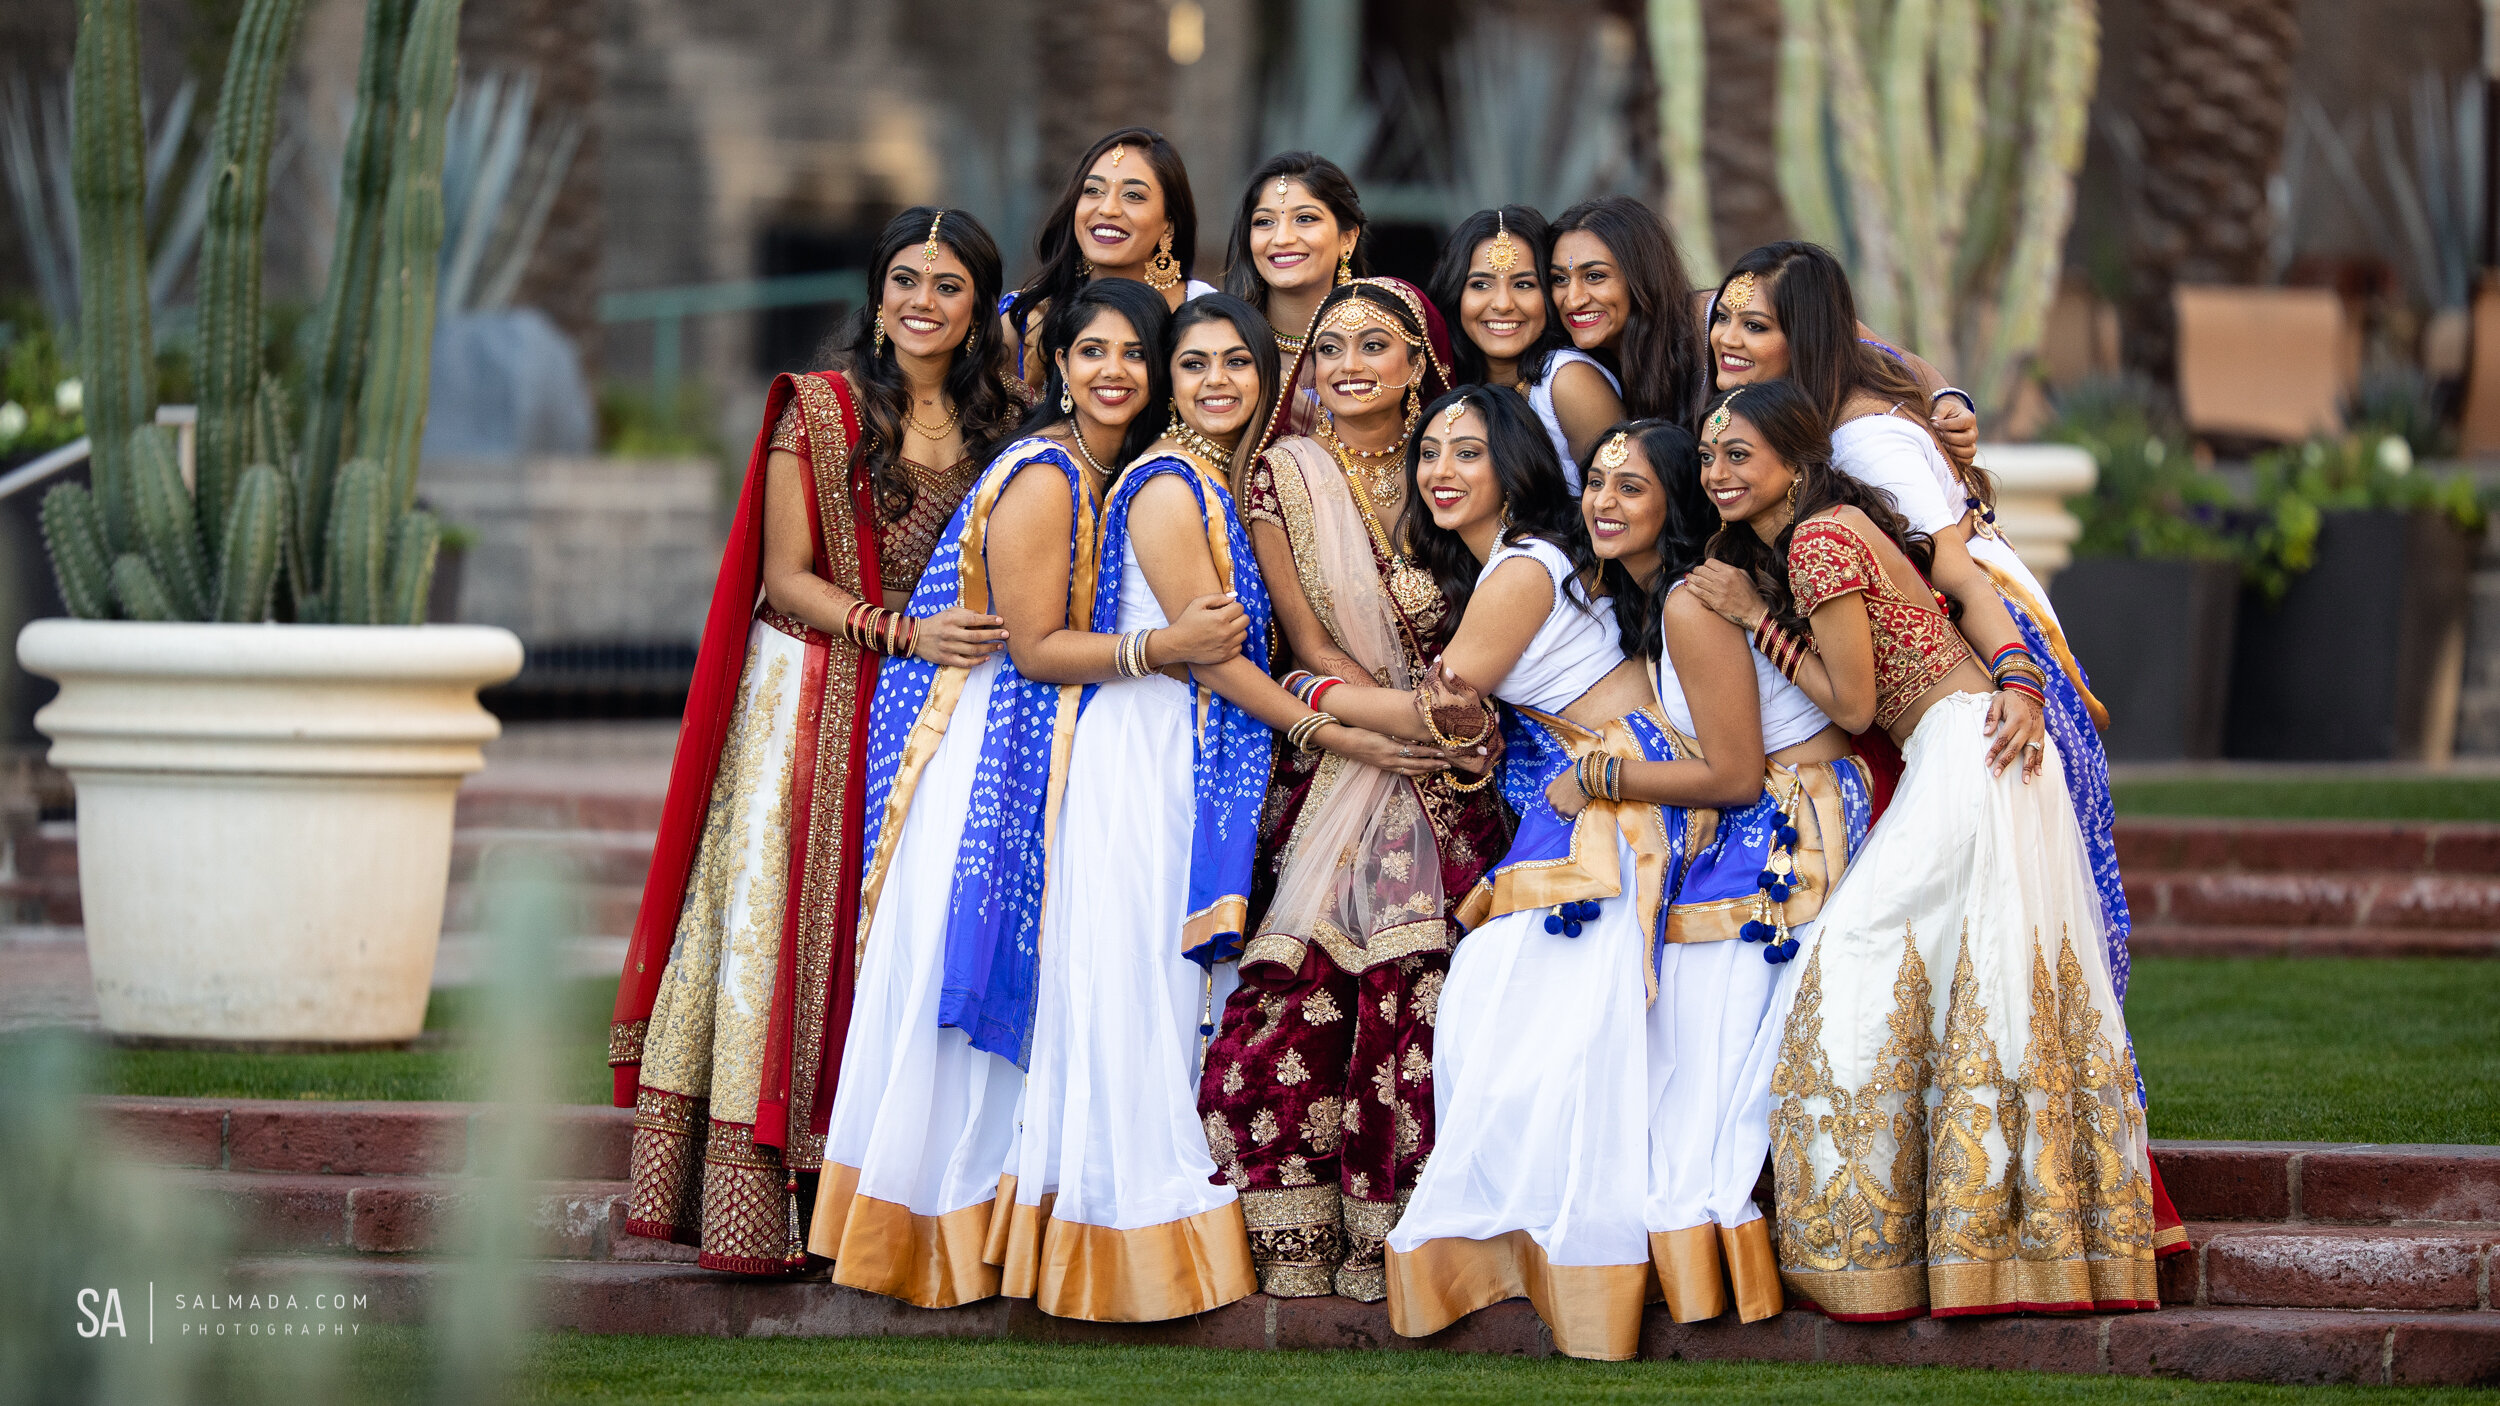 What is an appropriate saree or outfit as a guest at an Indian wedding? -  Quora